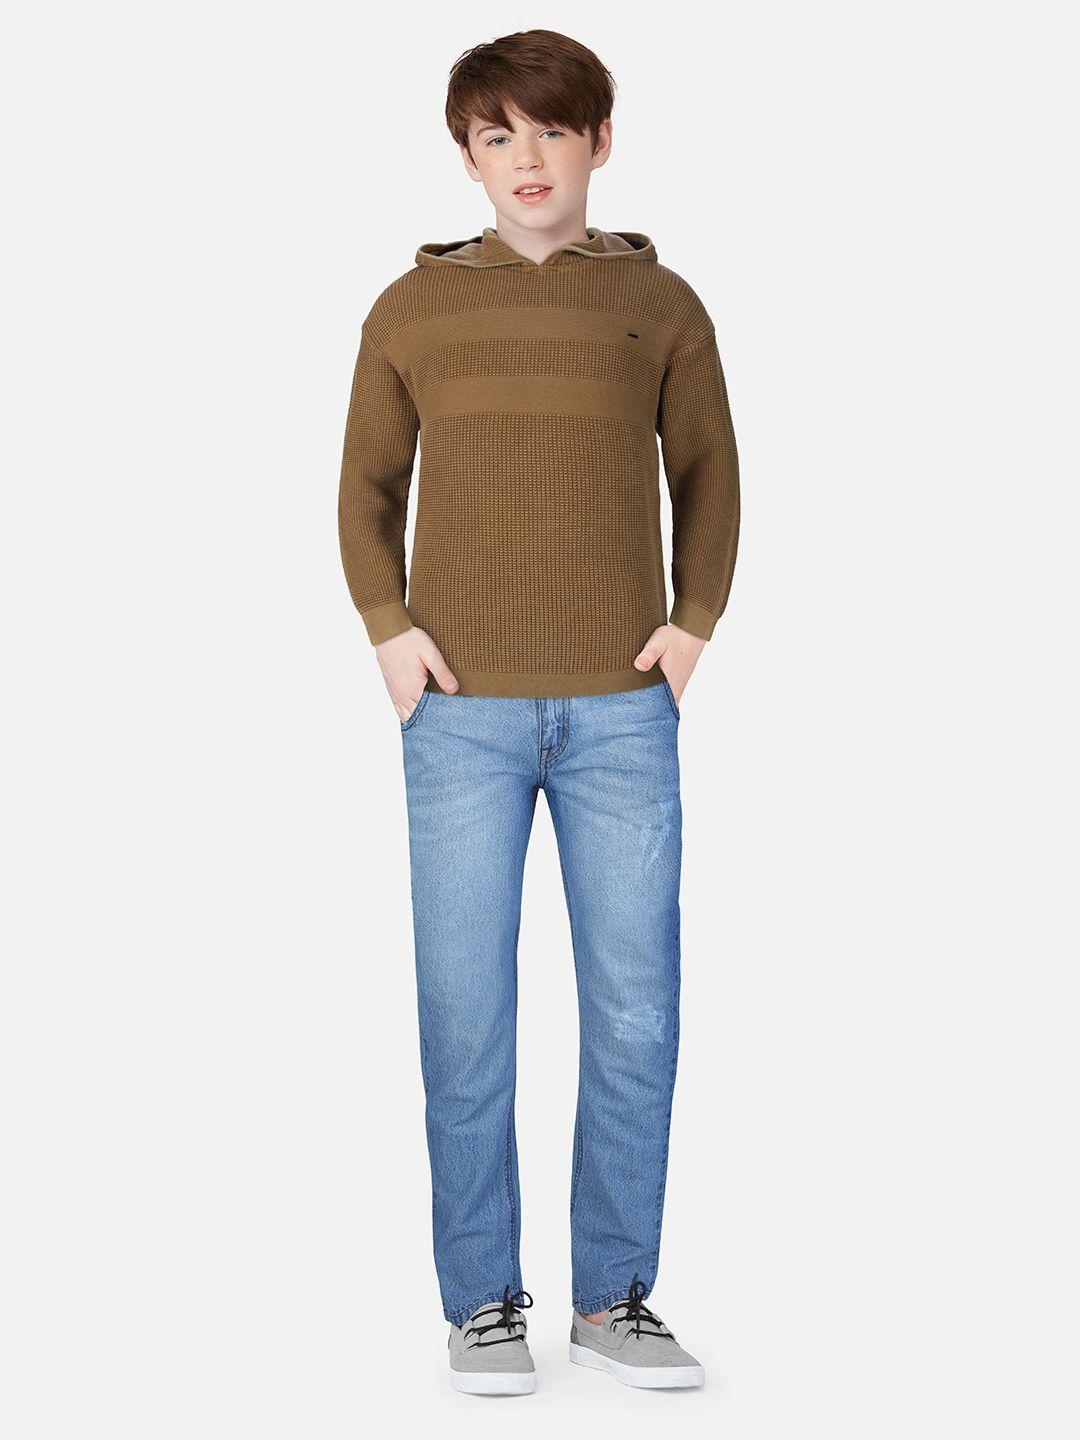 gini-and-jony-boys-brown-full-sleeves-pullover